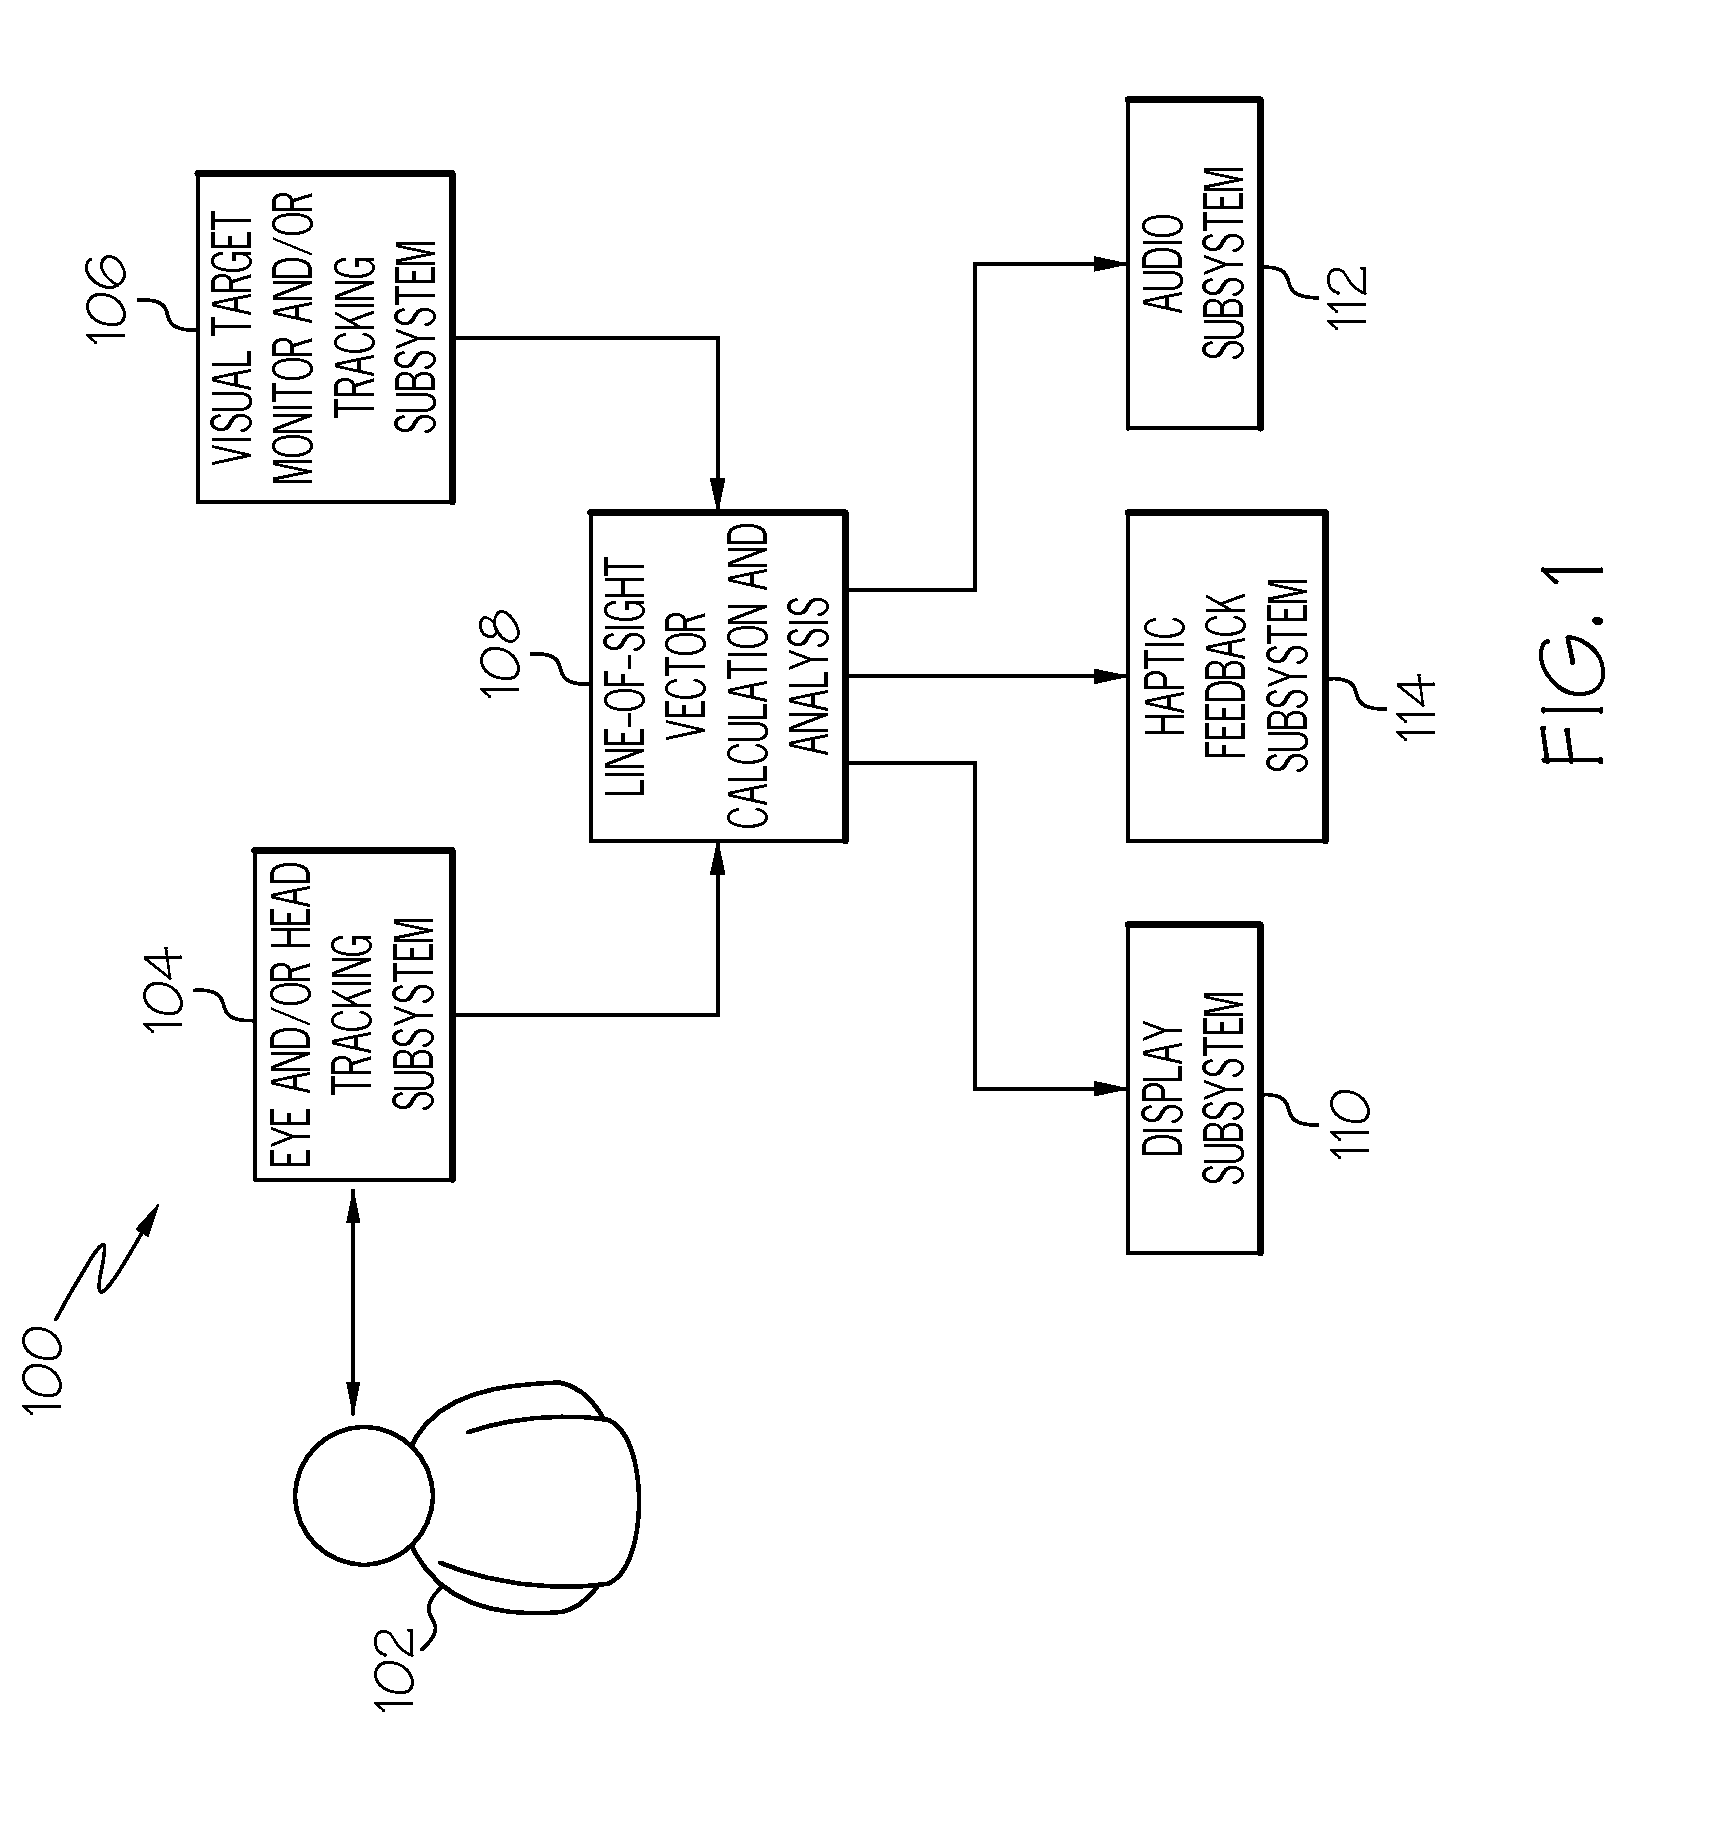 Visual search assistance for an occupant of a vehicle